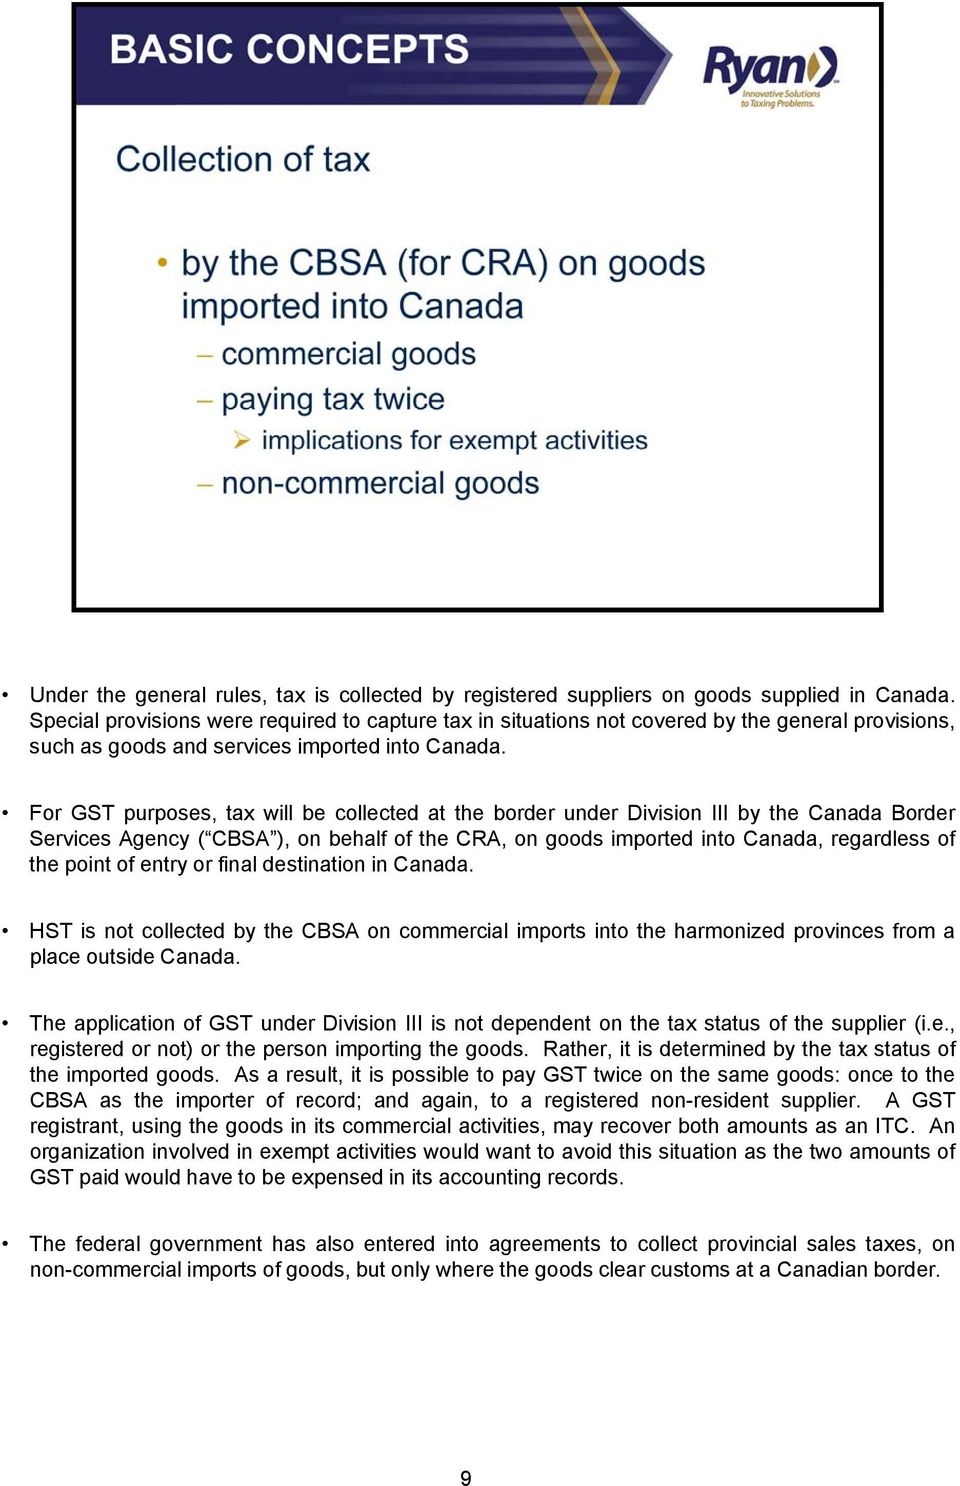 For GST purposes, tax will be collected at the border under Division III by the Canada Border Services Agency ( CBSA ), on behalf of the CRA, on goods imported into Canada, regardless of the point of